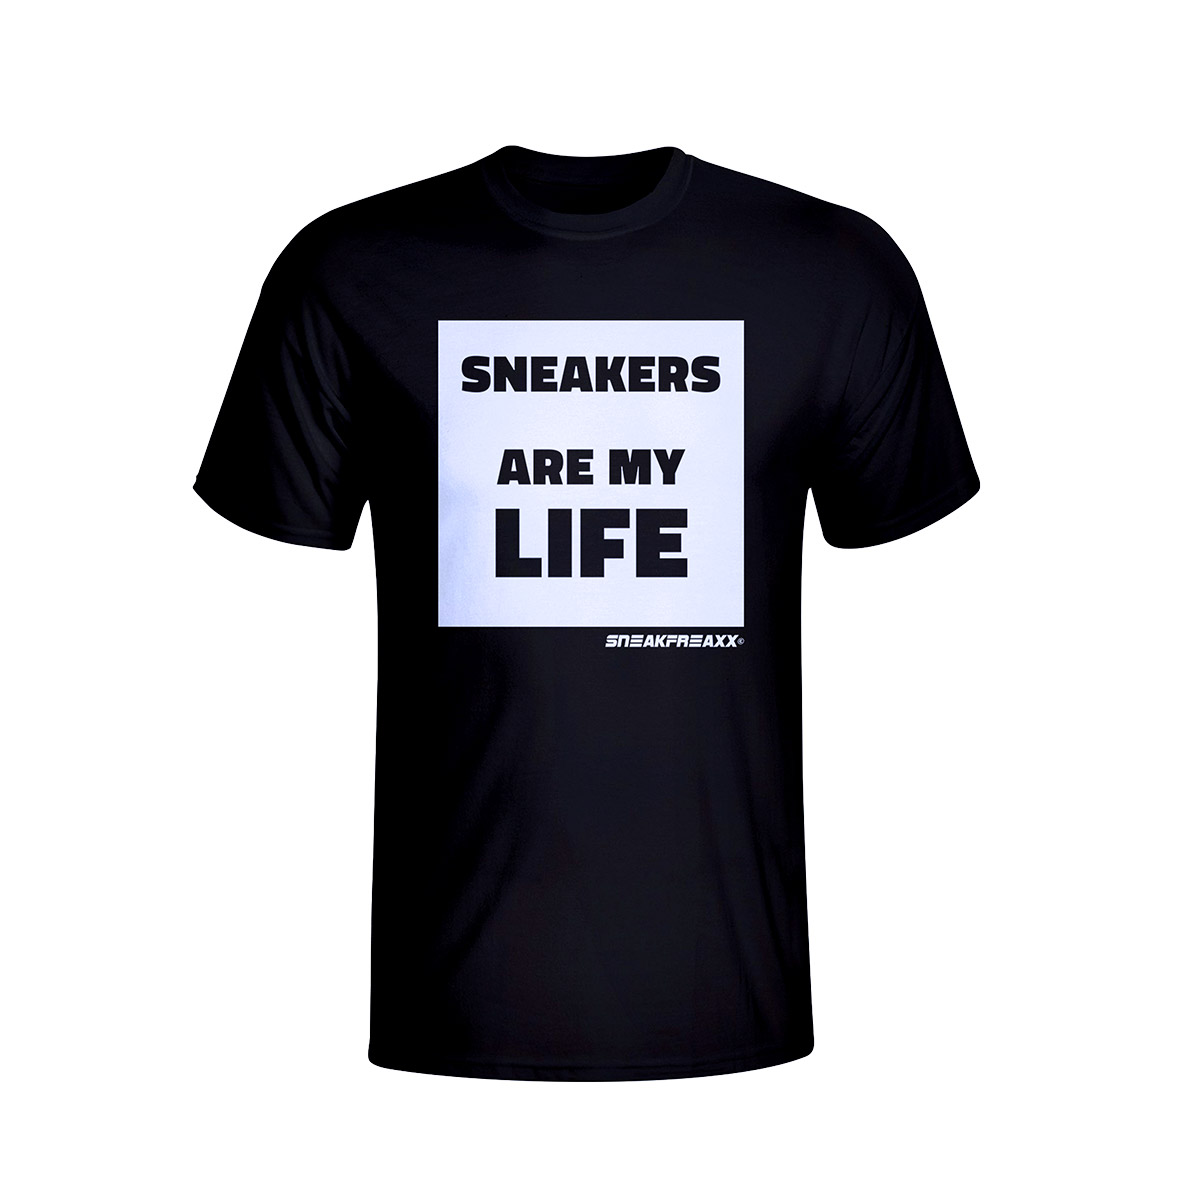 T-SHIRT - SNEAKERS ARE MY LIFE